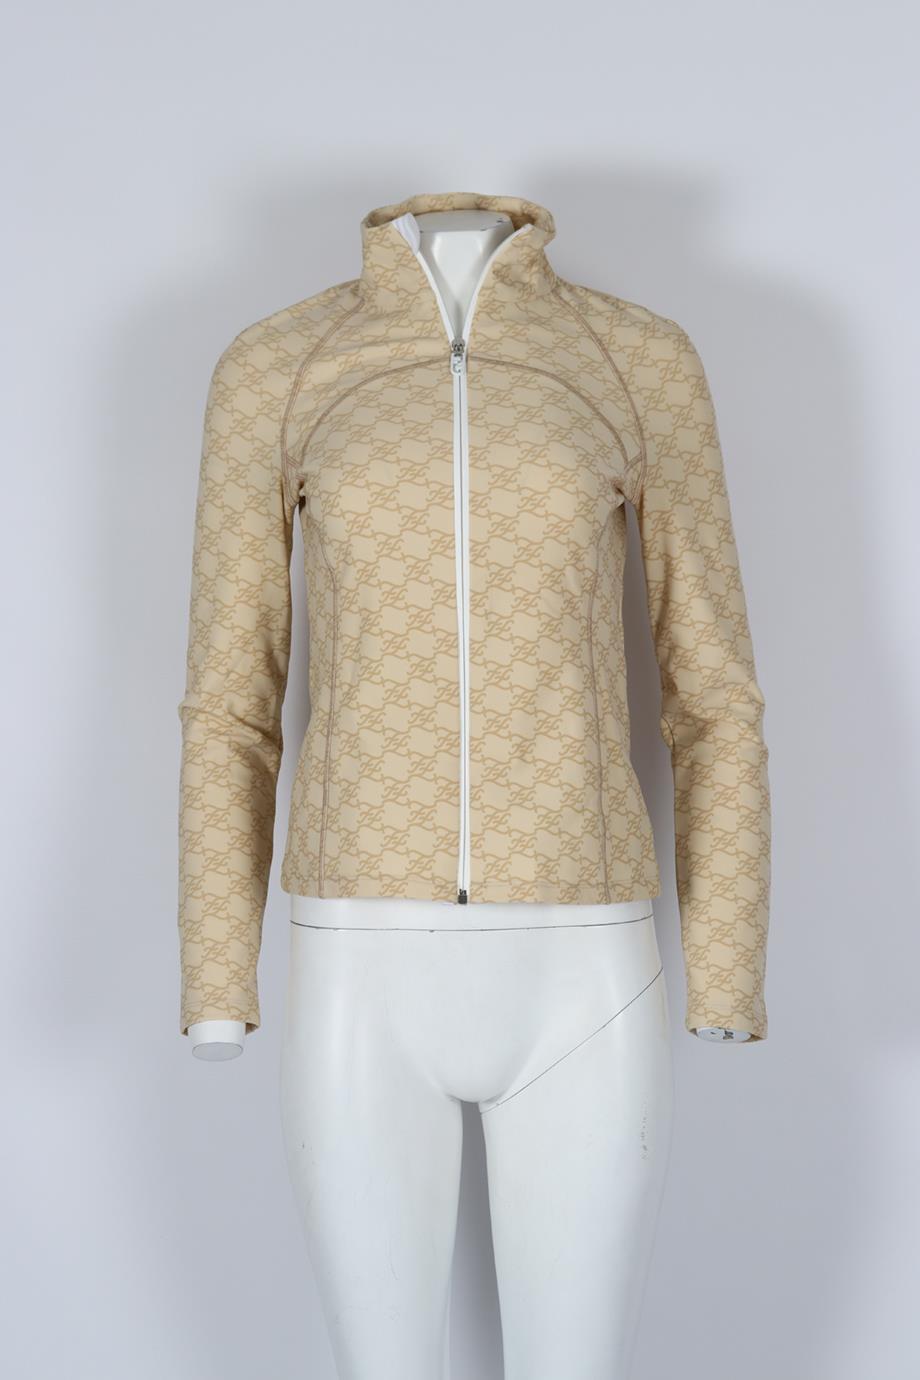 Fendi Ff Print Stretch Jersey Jacket. Beige and white. Long Sleeve. Turtleneck. Zip fastening - Front. 86% Polyester, 14% spandex. IT 42 (UK 10, US 6, FR 38). Bust: 33 in. Waist: 28.5 in. Hips: 36.2 in. Length: 23.1 in. Condition: Used. Very good